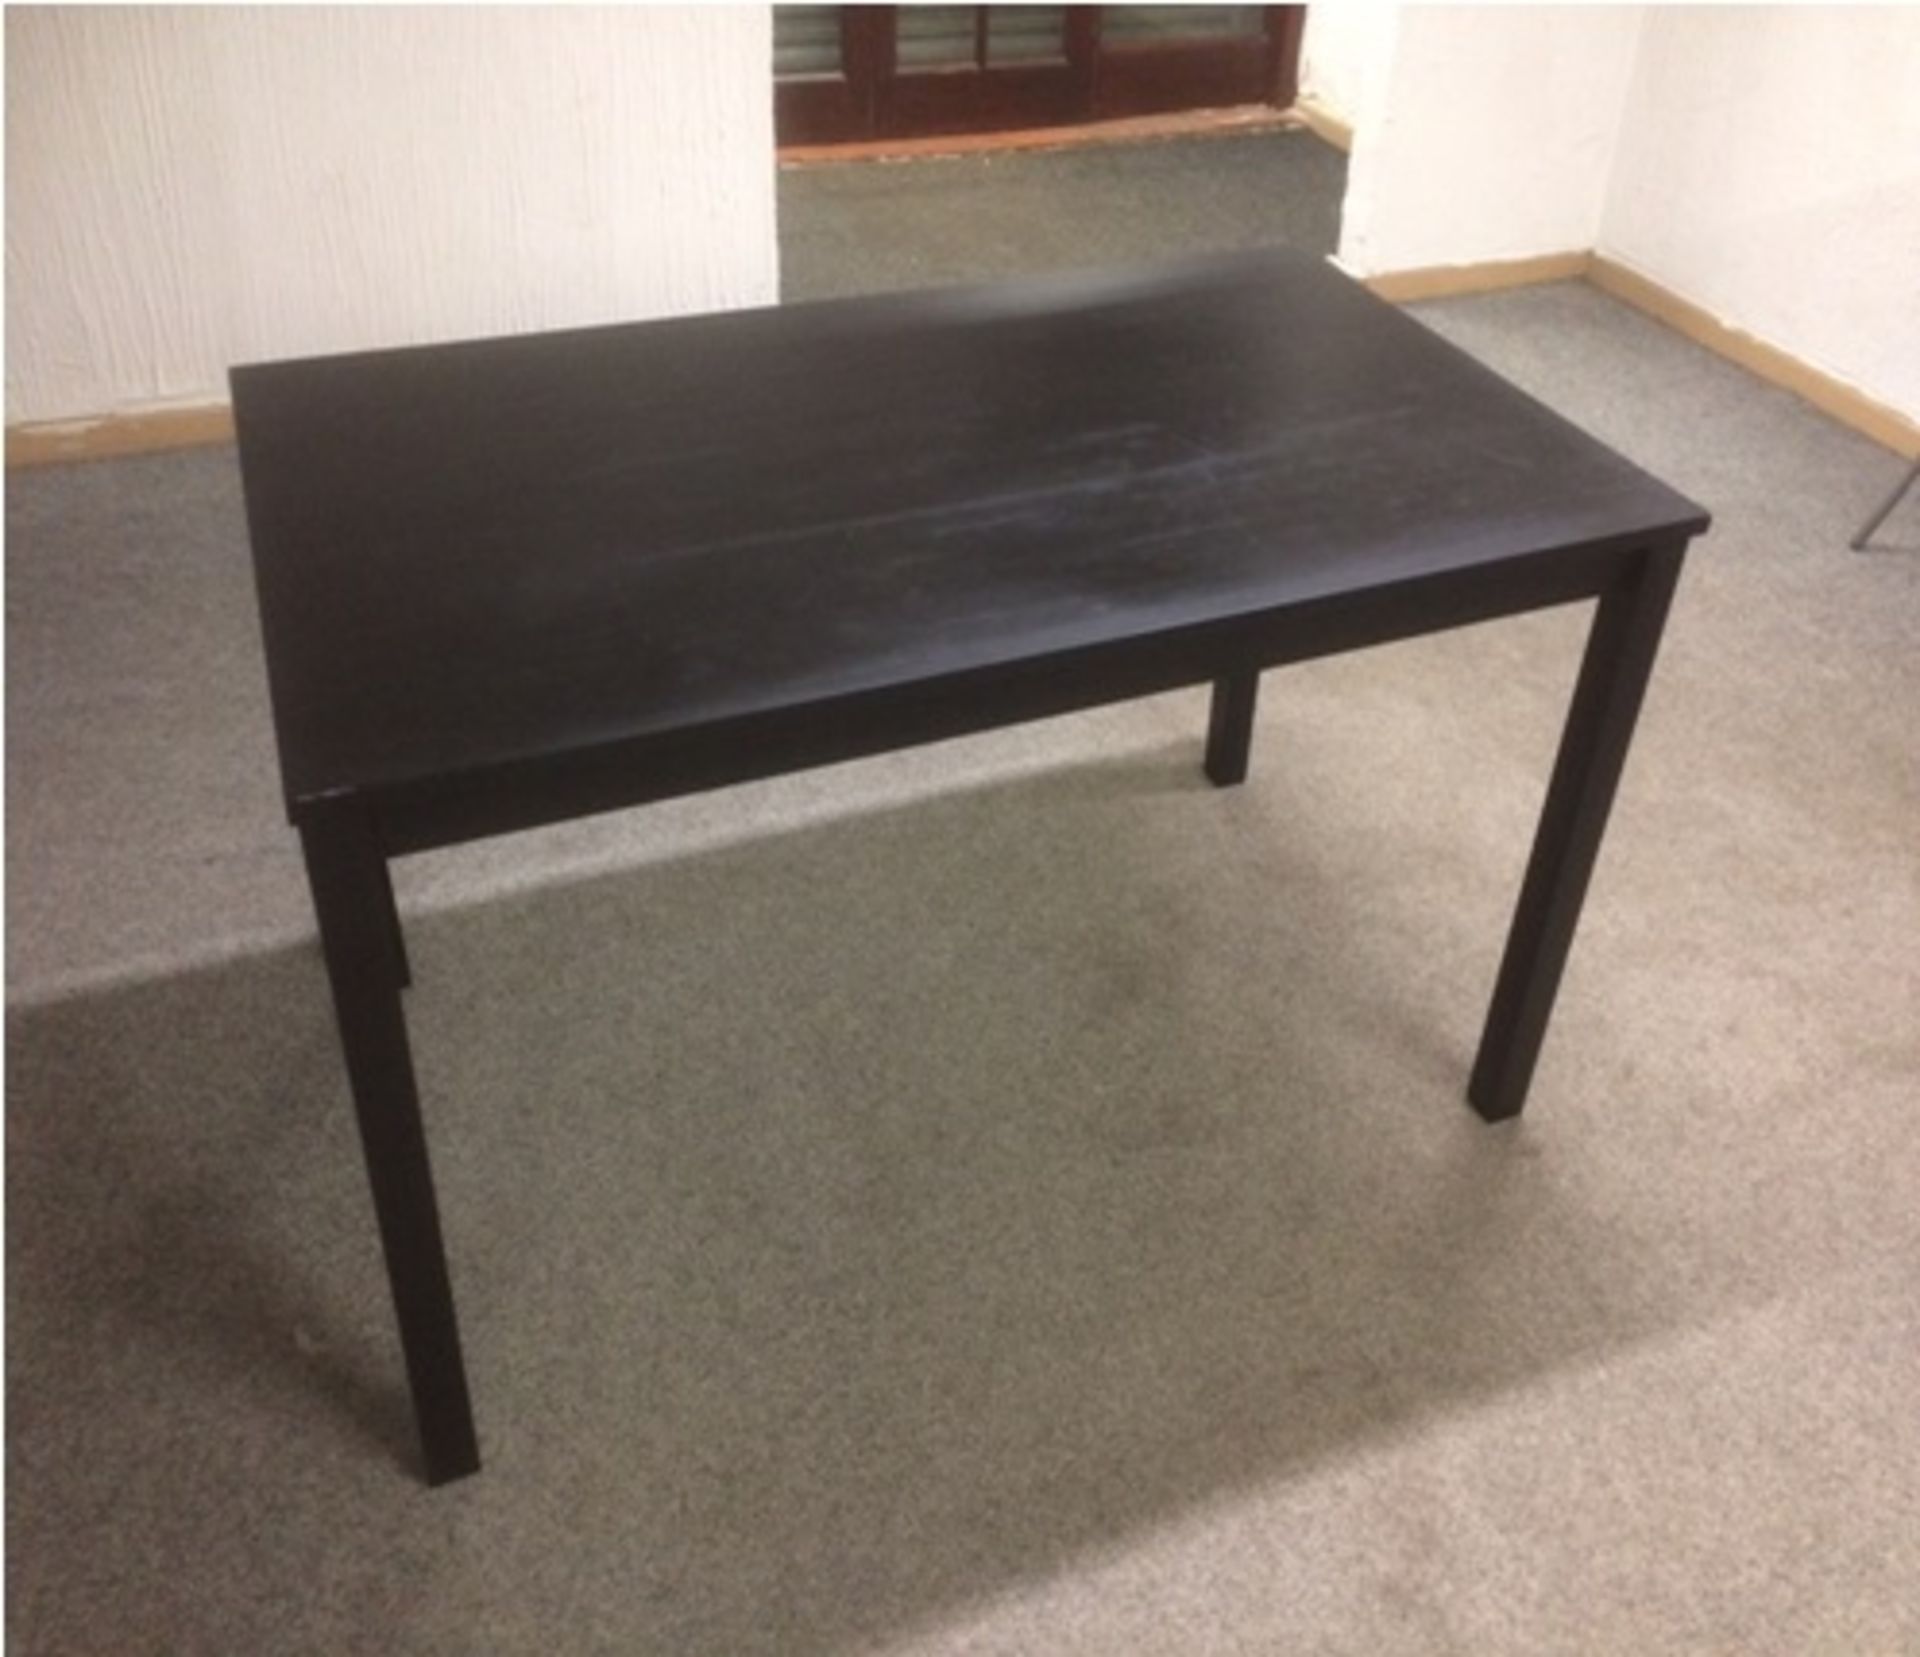 1 x Black Wooden Dining Table 6 Seater - New & Boxed